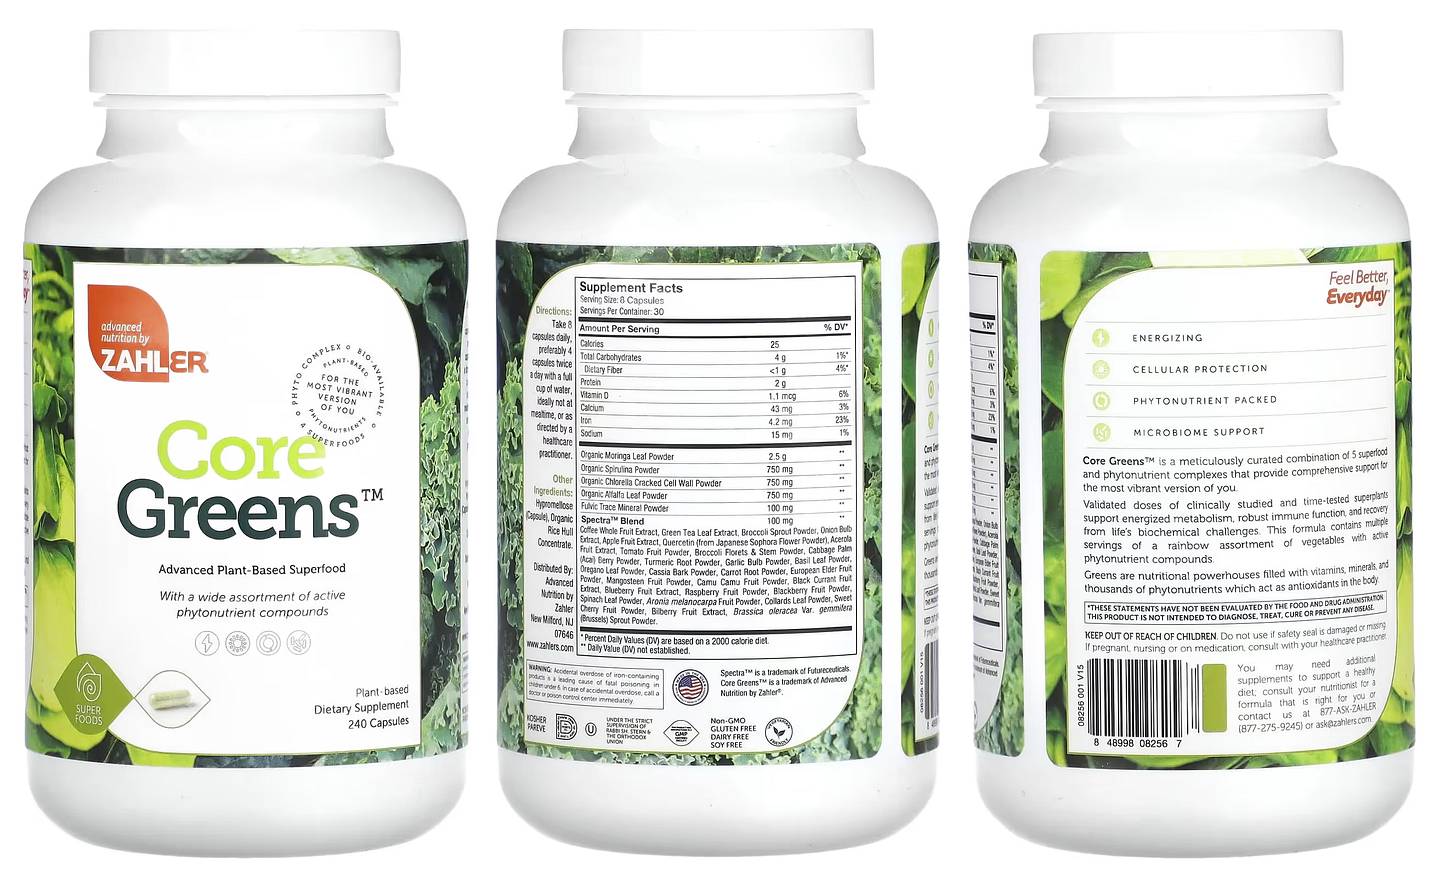 Zahler, Core Greens, Advanced Plant-Based Superfood packaging